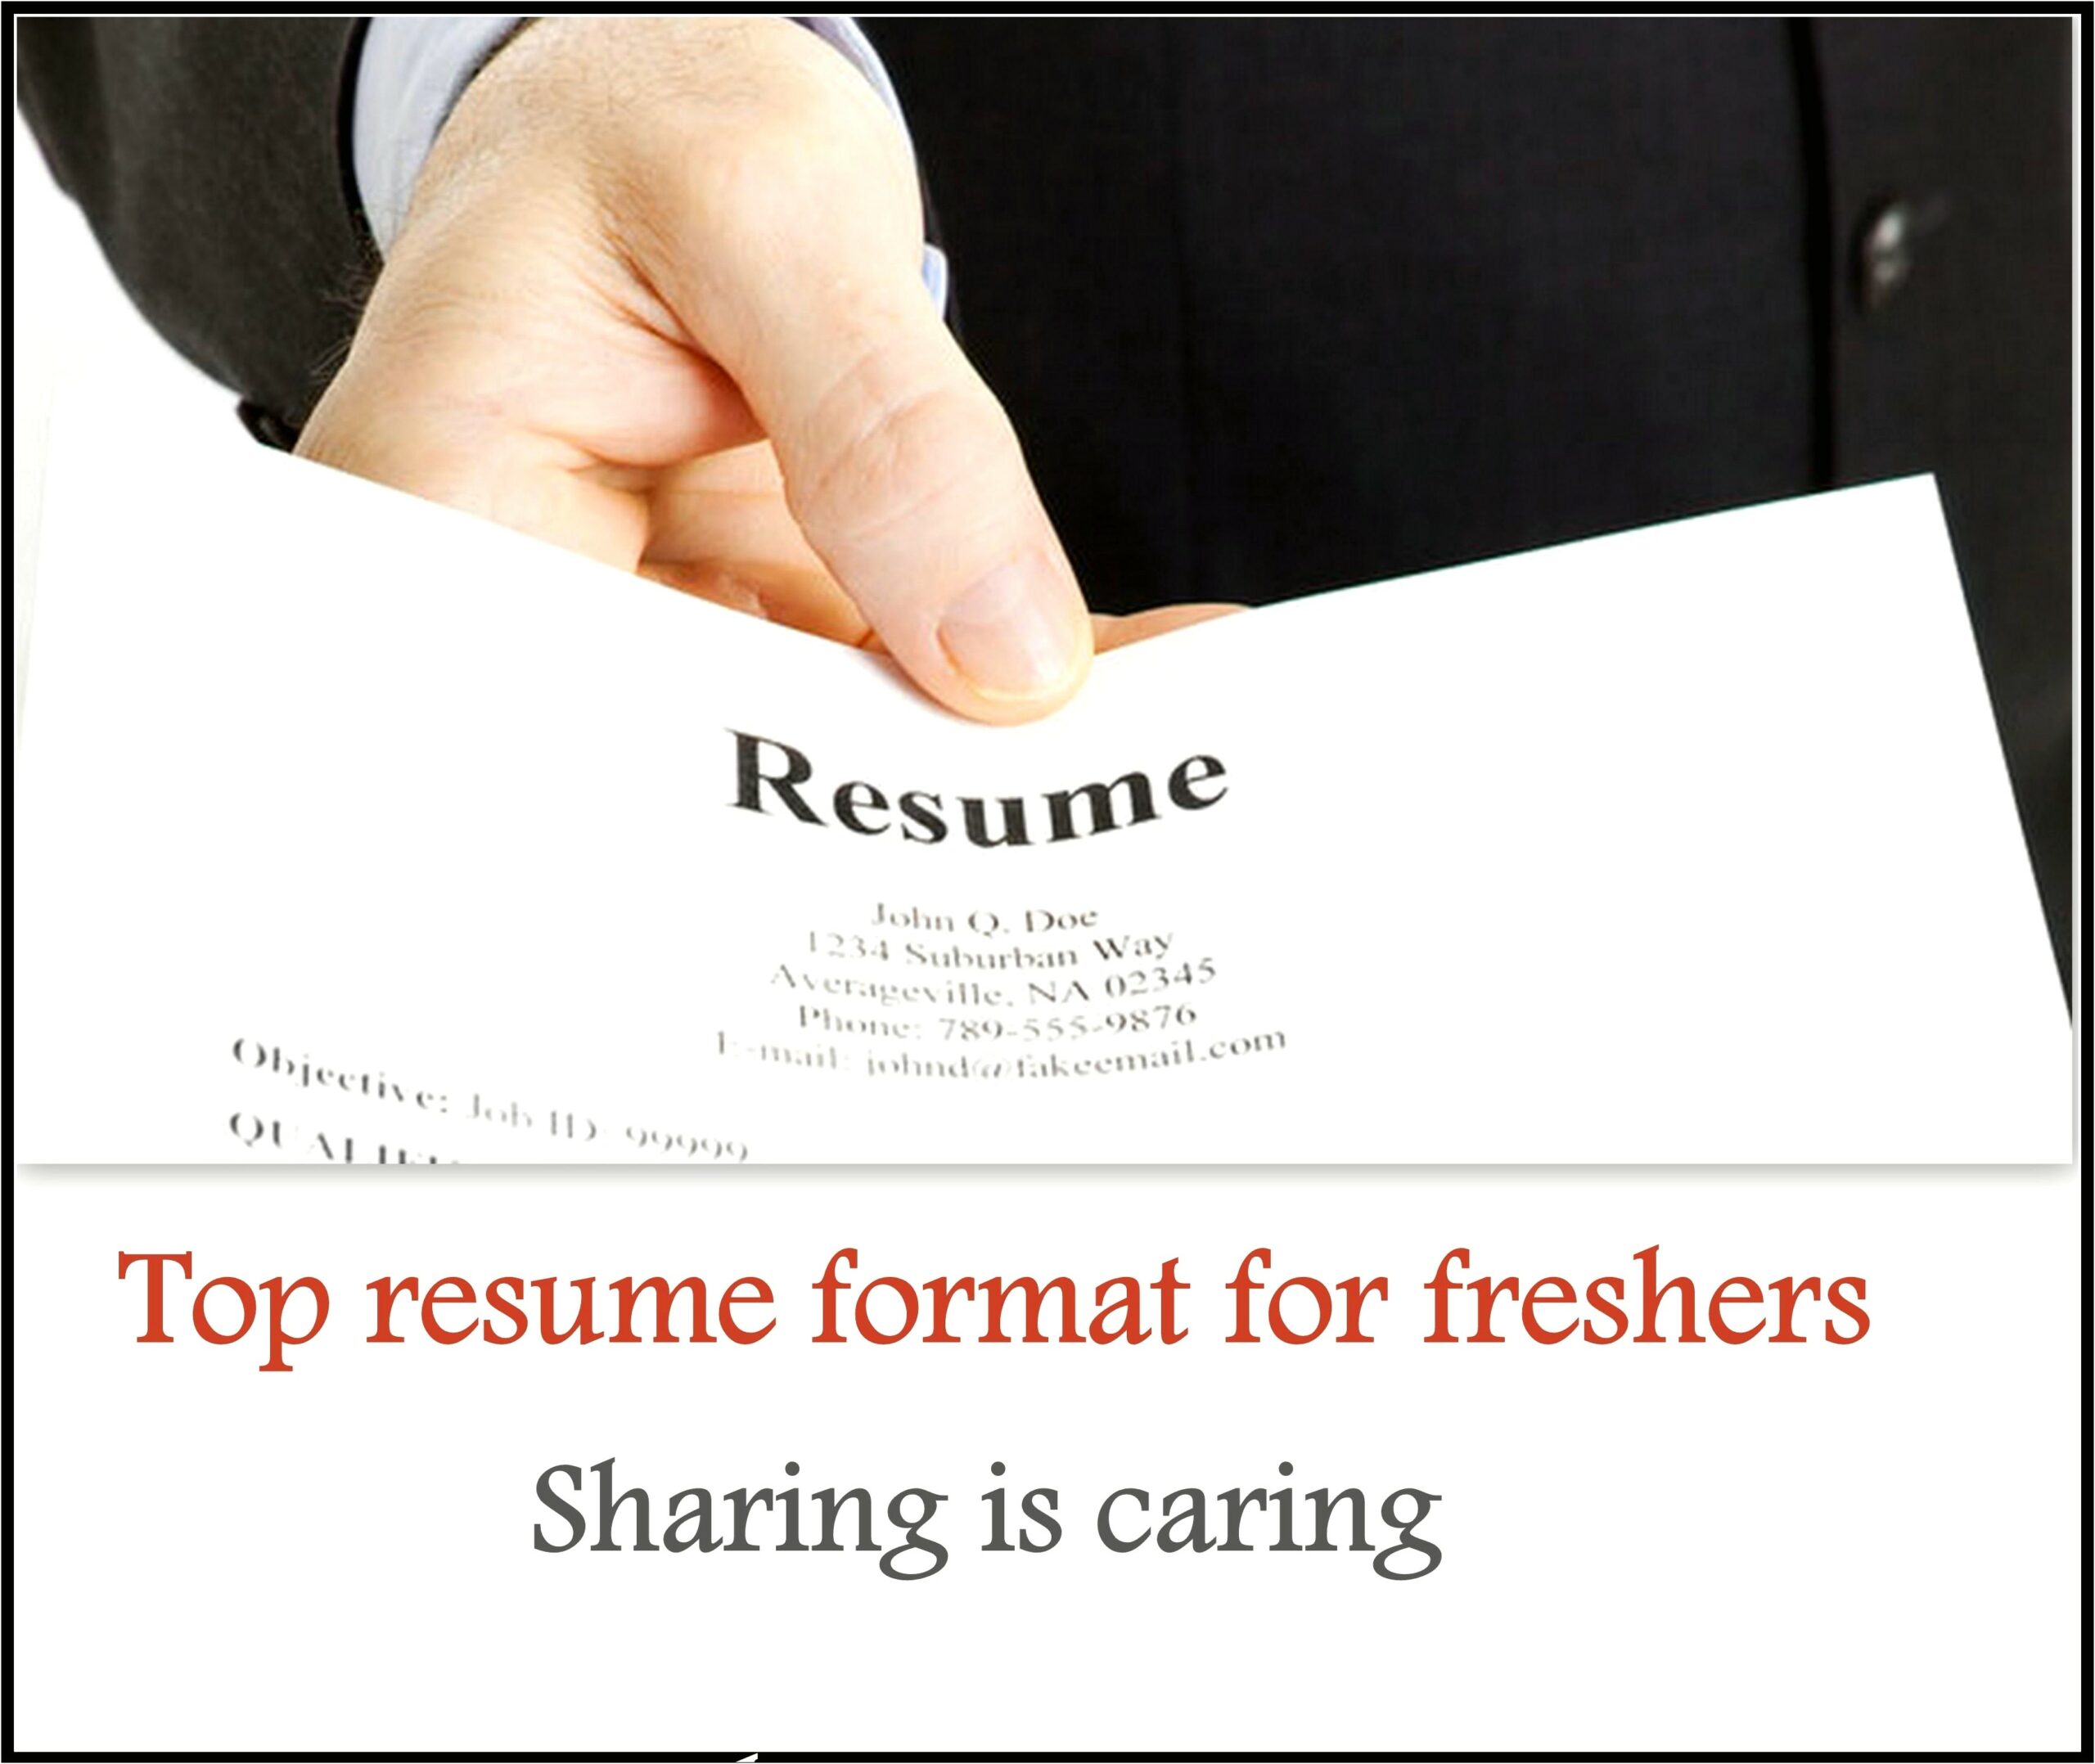 Standard Resume Format For Freshers Free Download